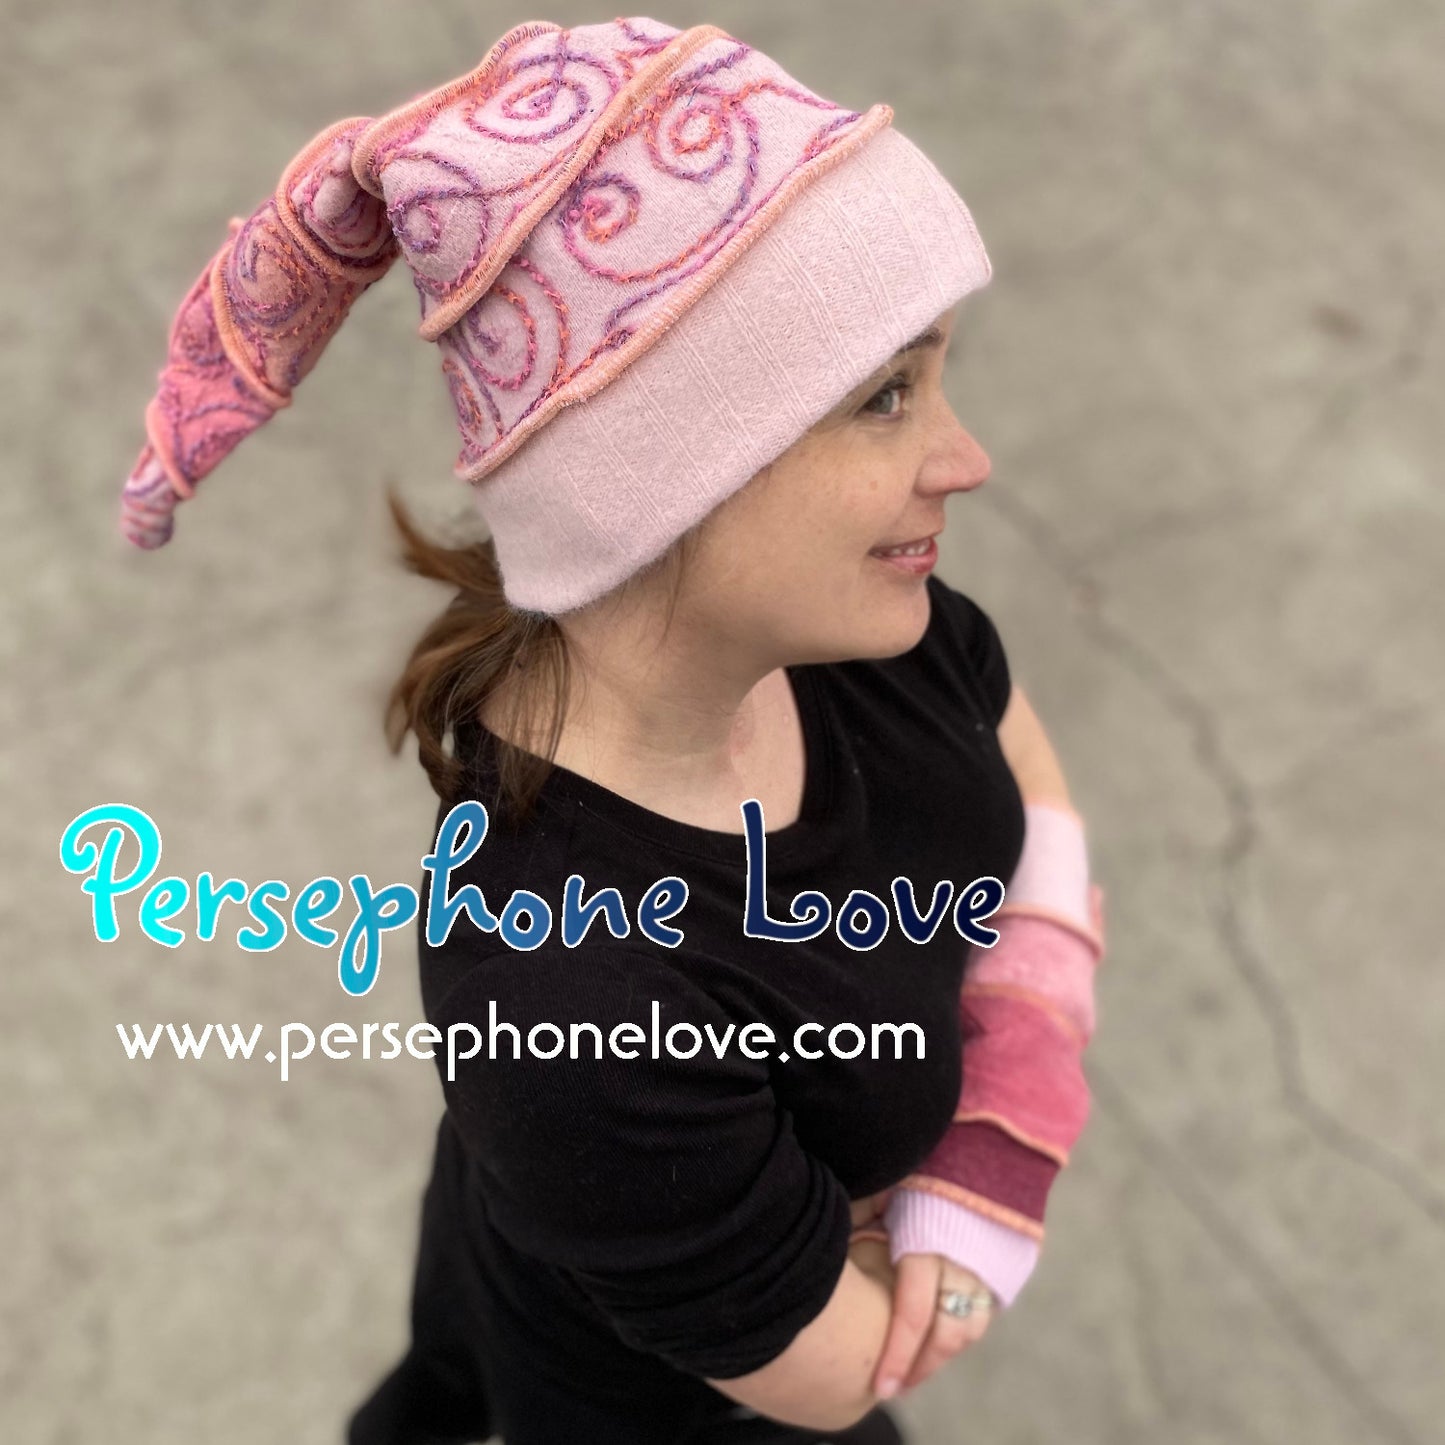 Katwise inspired peach rose silly-string recycled patchwork sweater pixie elf wizardy hat-1393